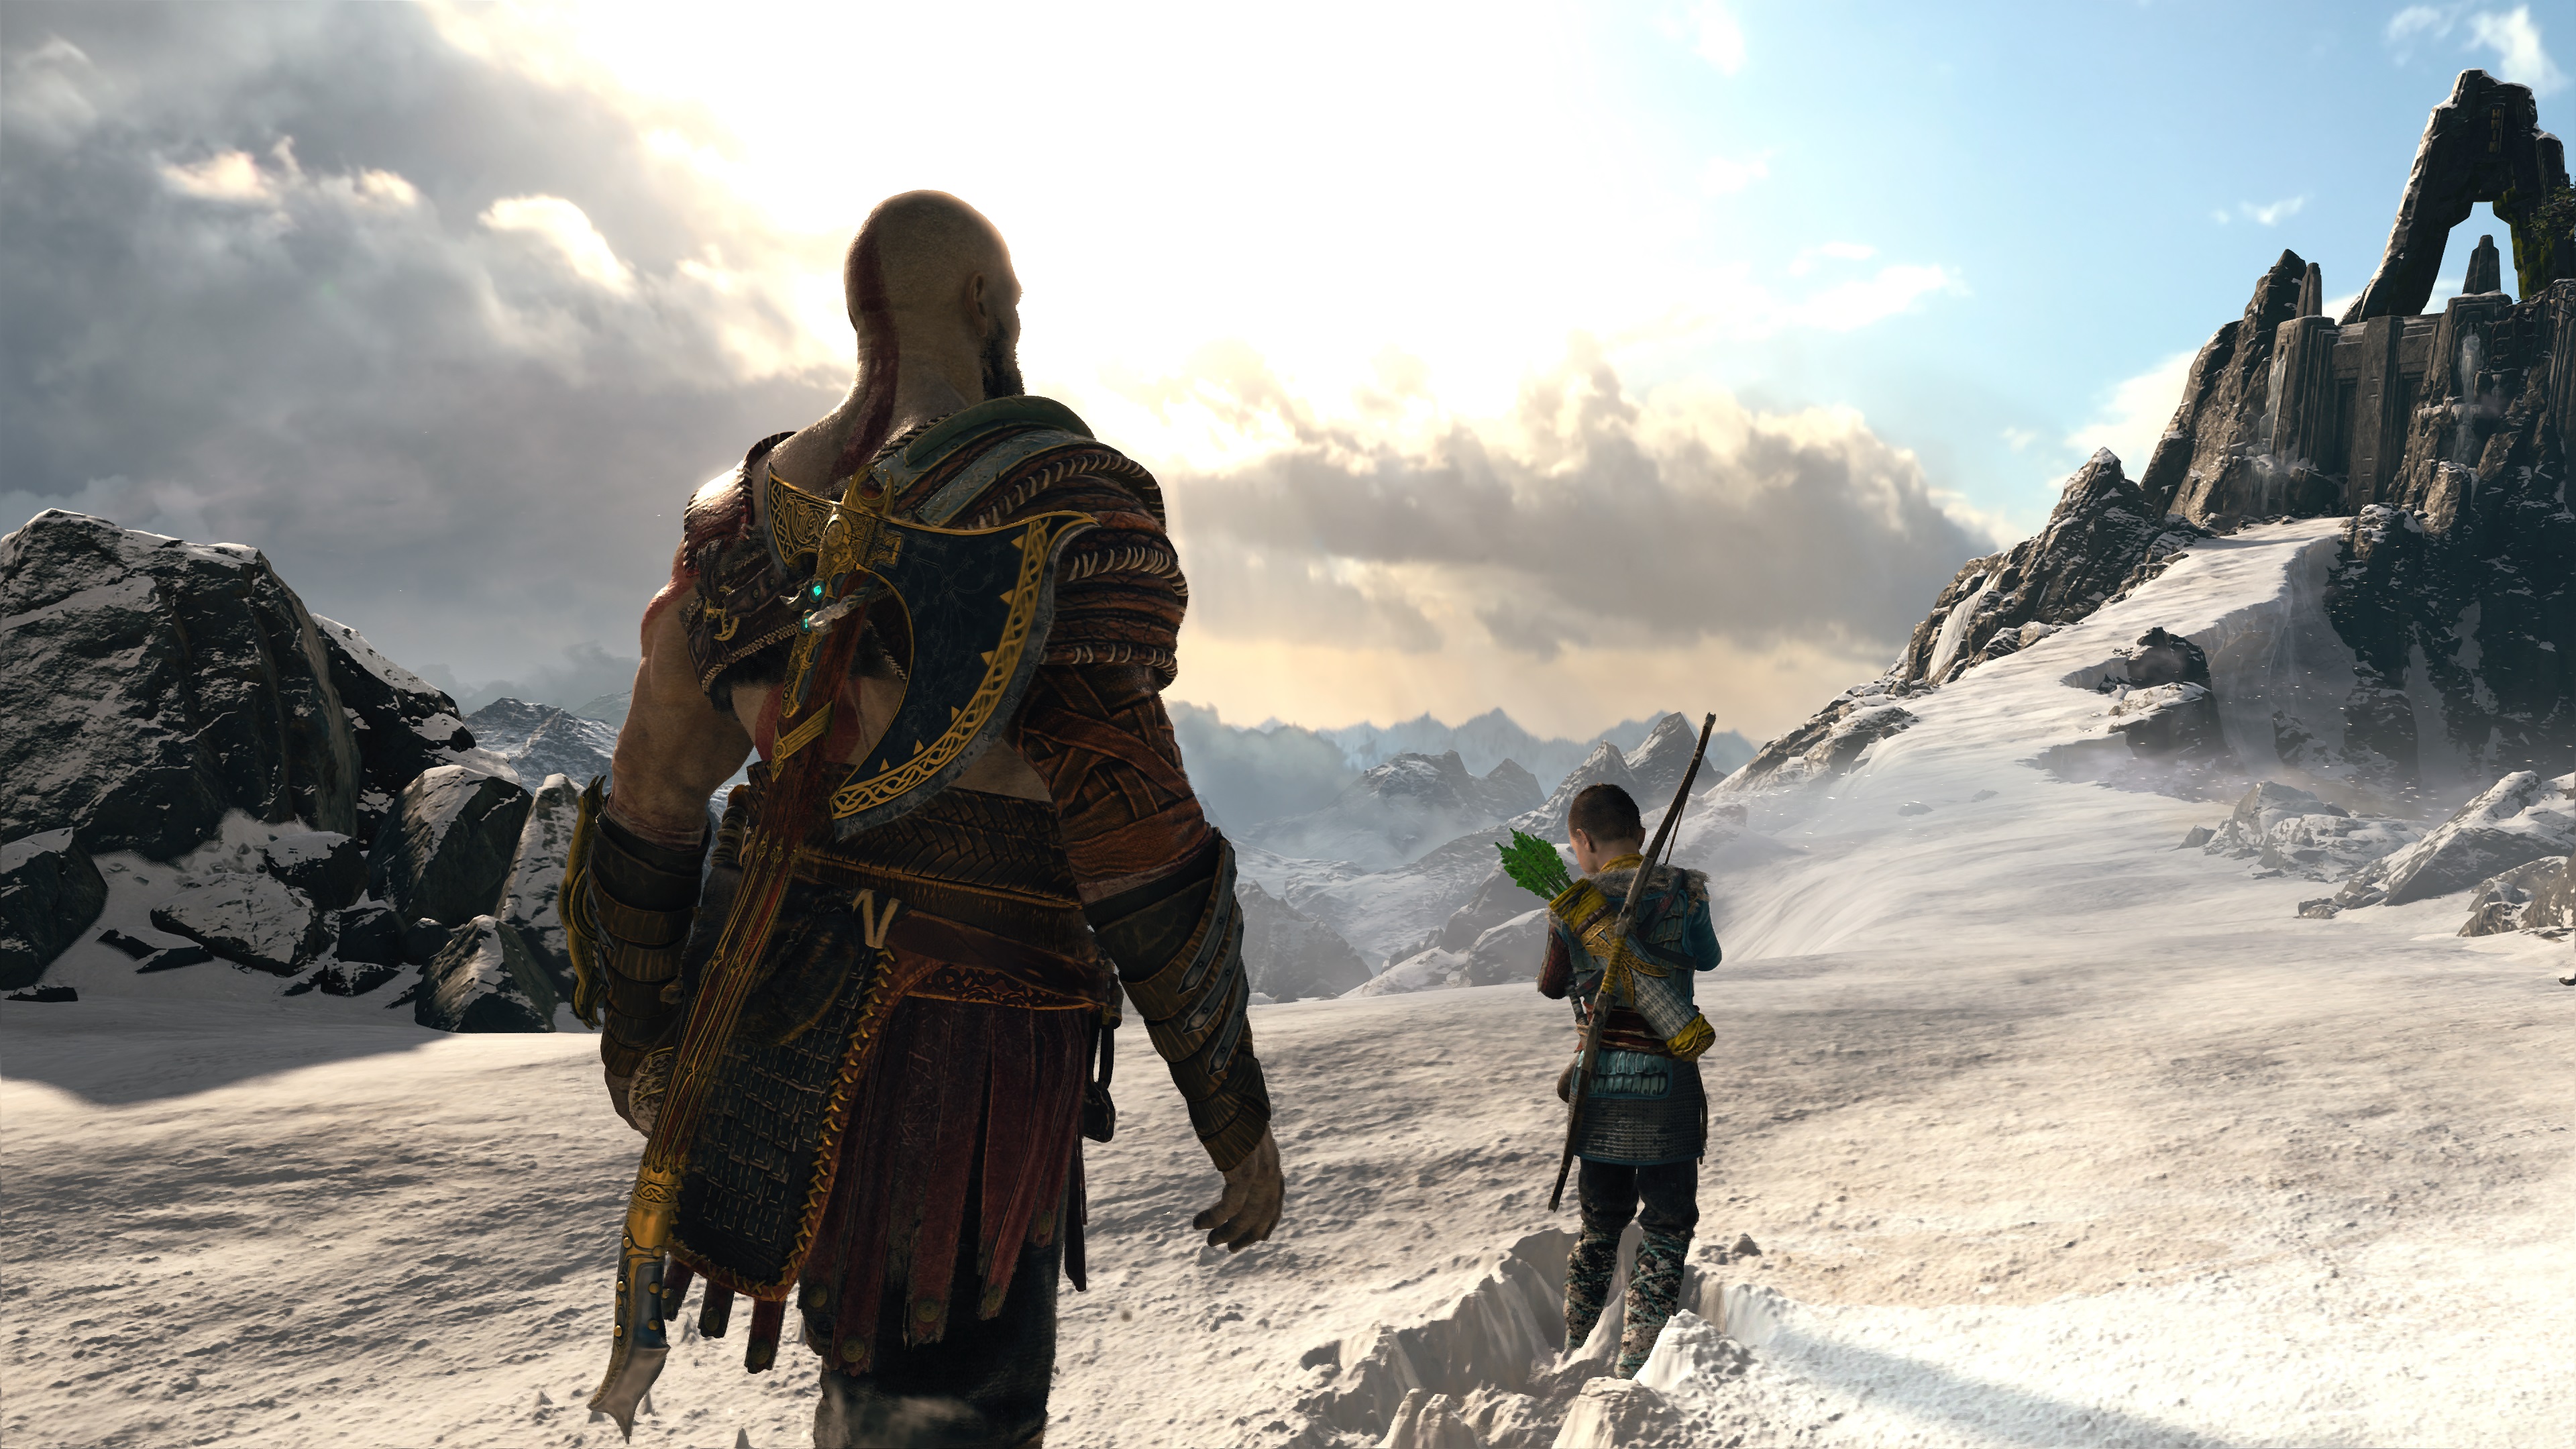 Check out our God Of War Gameplay Video